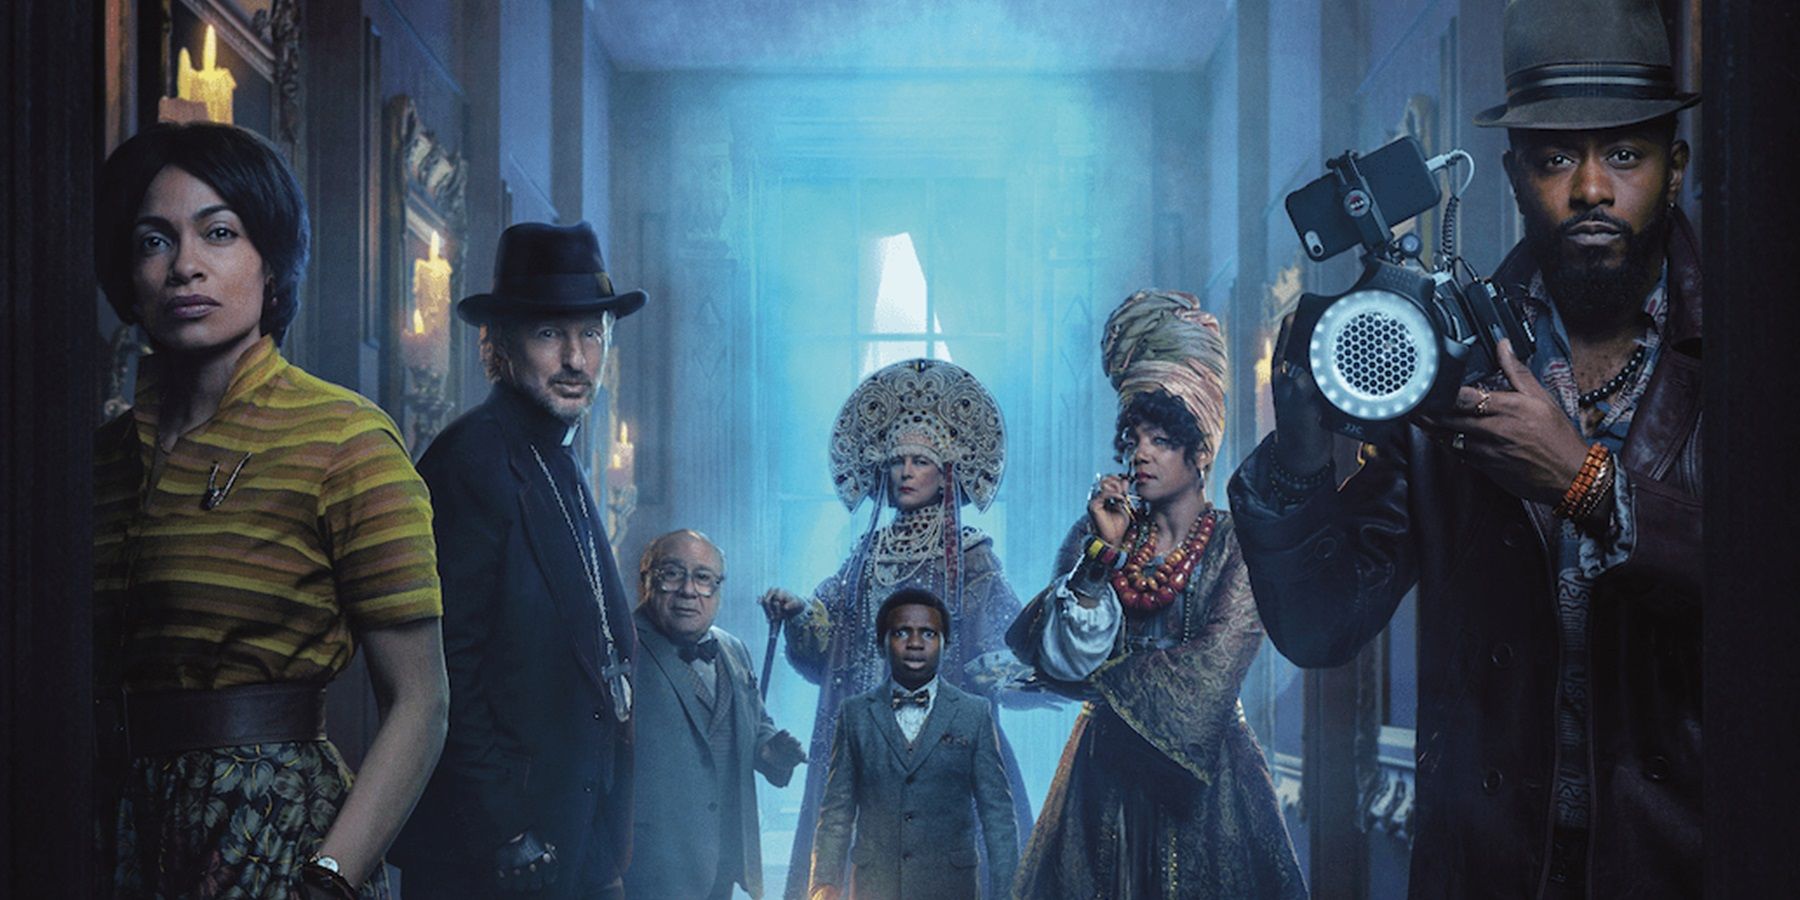 The cast of Haunted Mansion on the poster